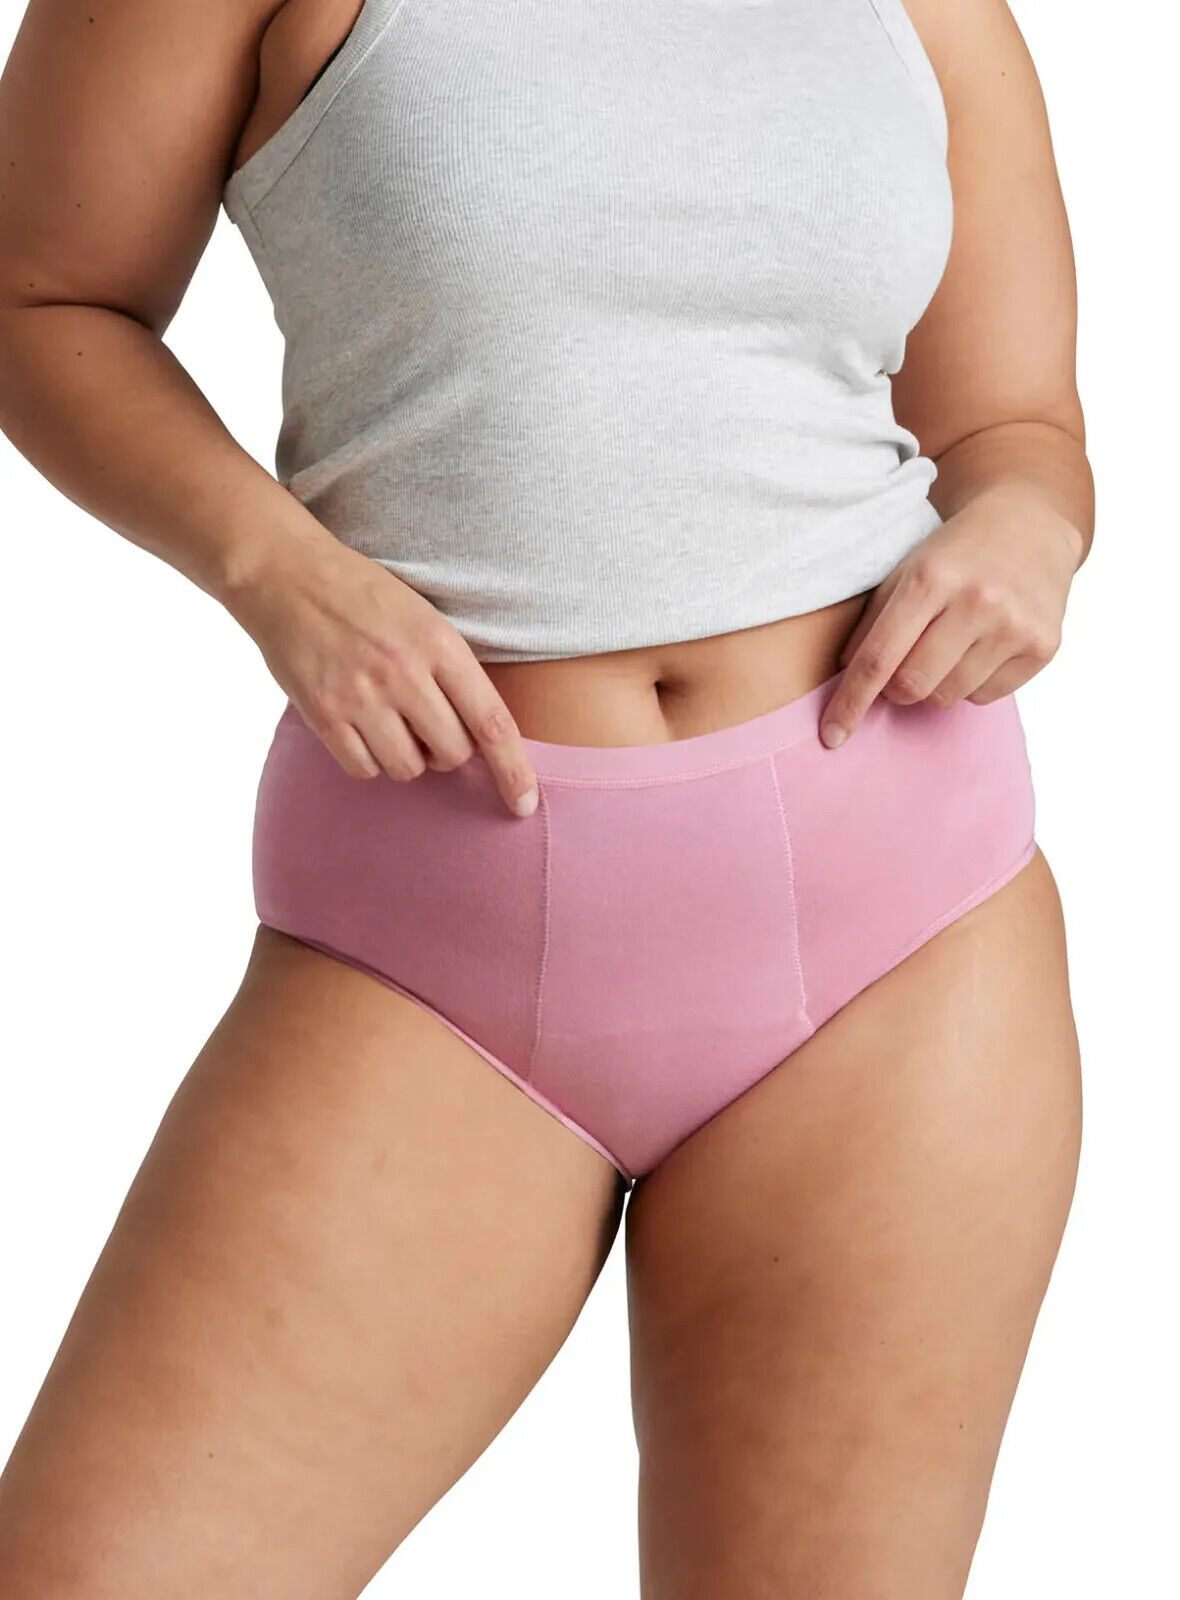 Love Luna Period Knickers Full Brief In Blushing Pink – Simply